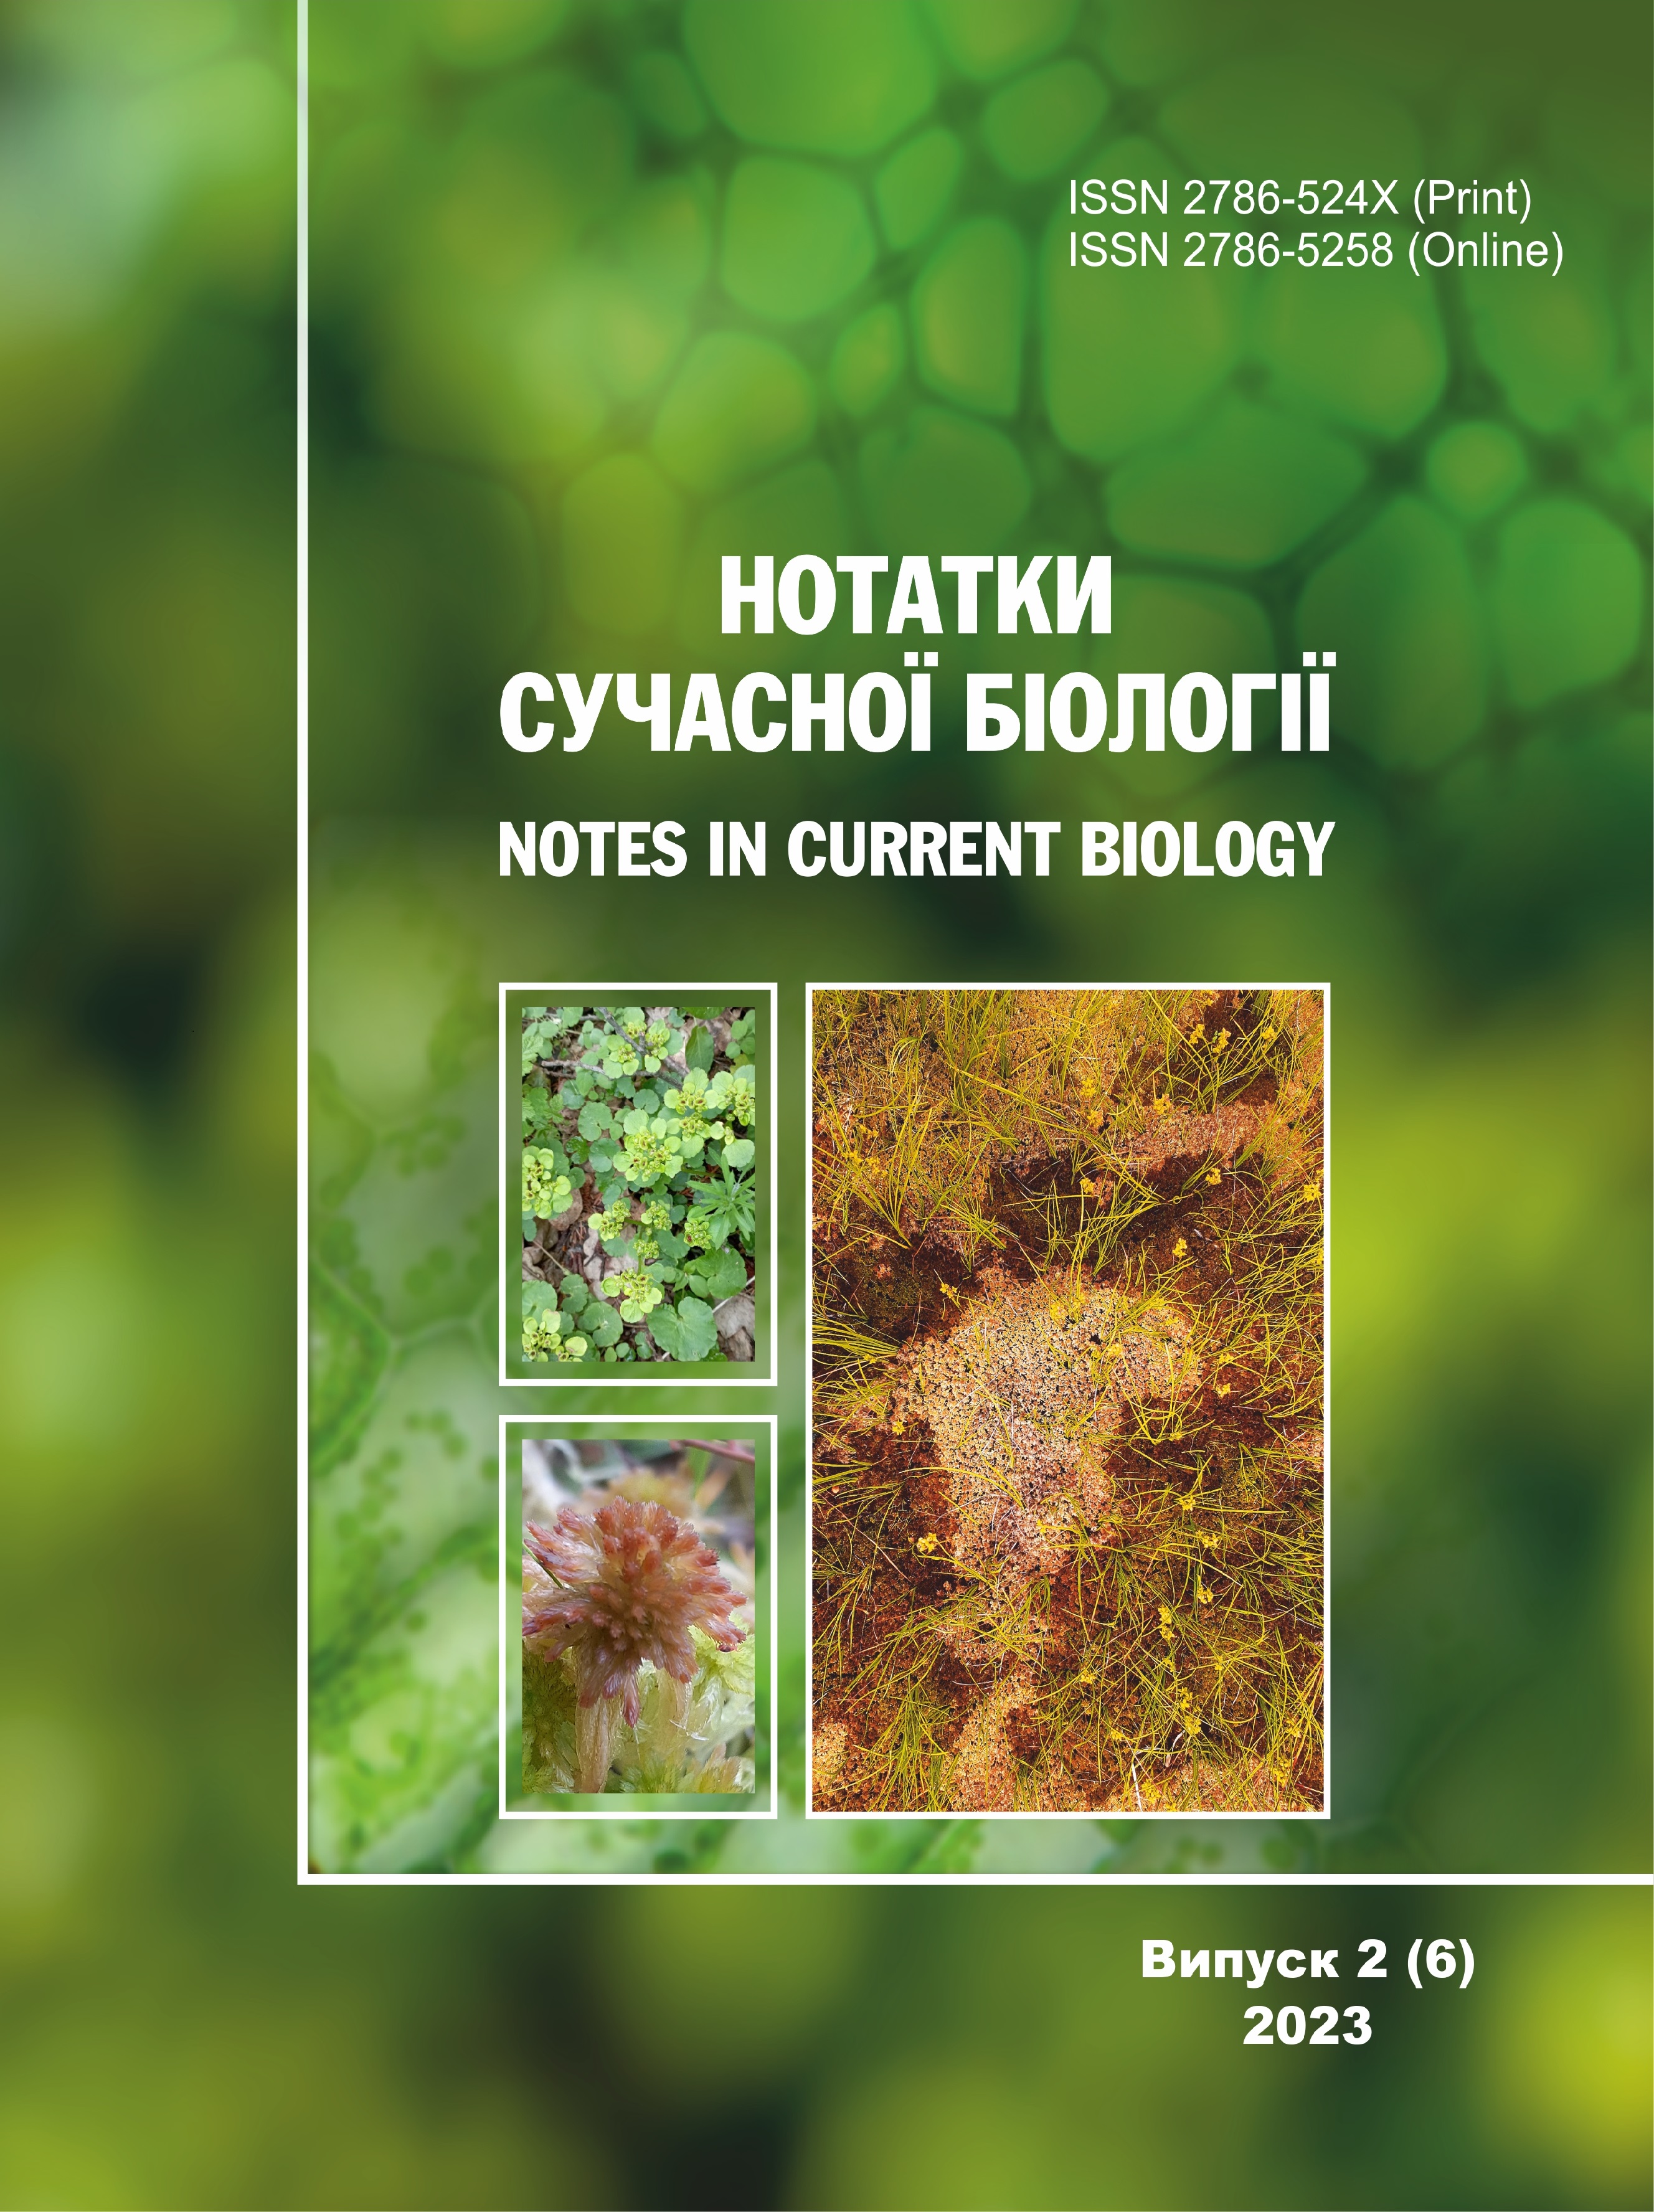 					View Vol. 6 No. 2 (2023): Notes in current biology 
				